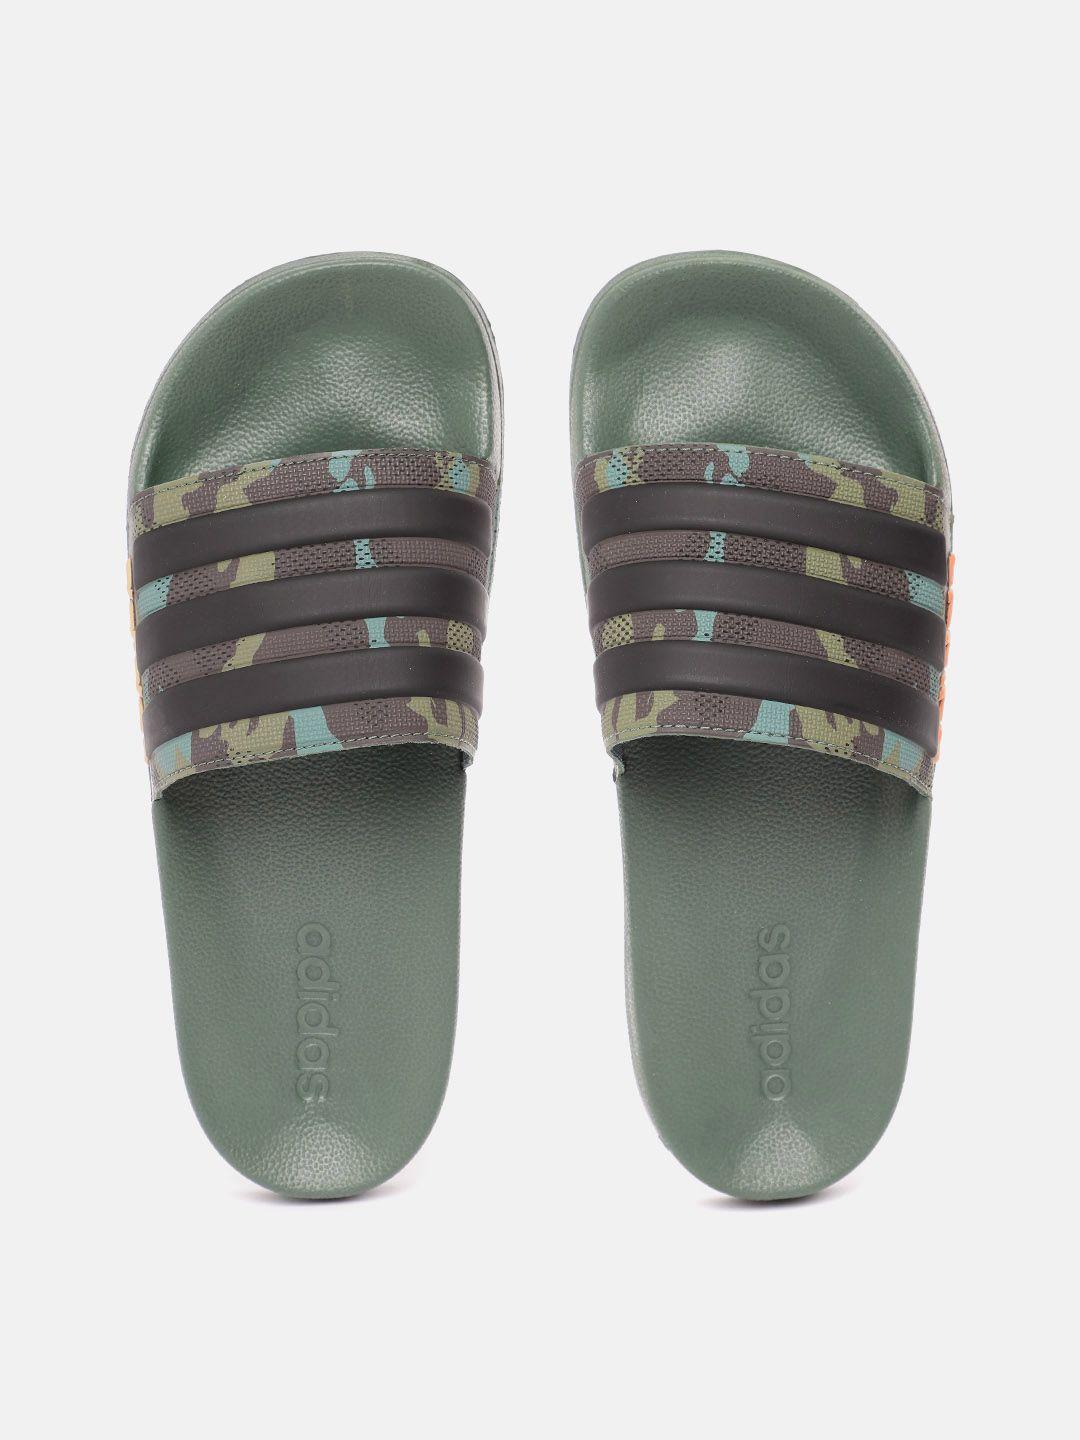 adidas unisex camouflage printed sliders with striped detail